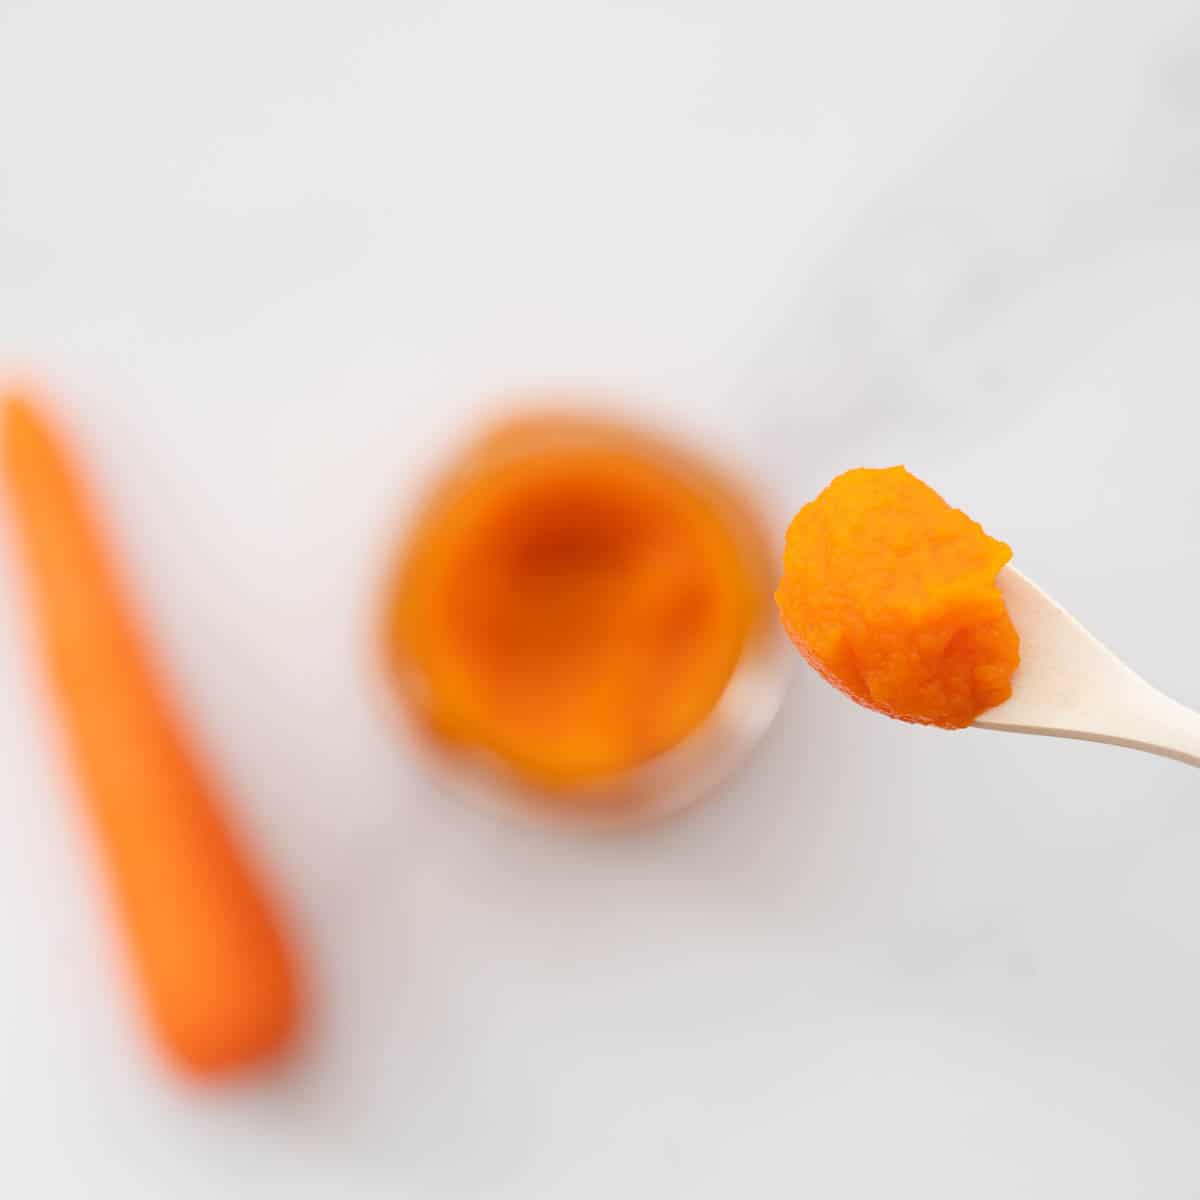 A spoonful of carrot puree being held above a glass jar of puree.